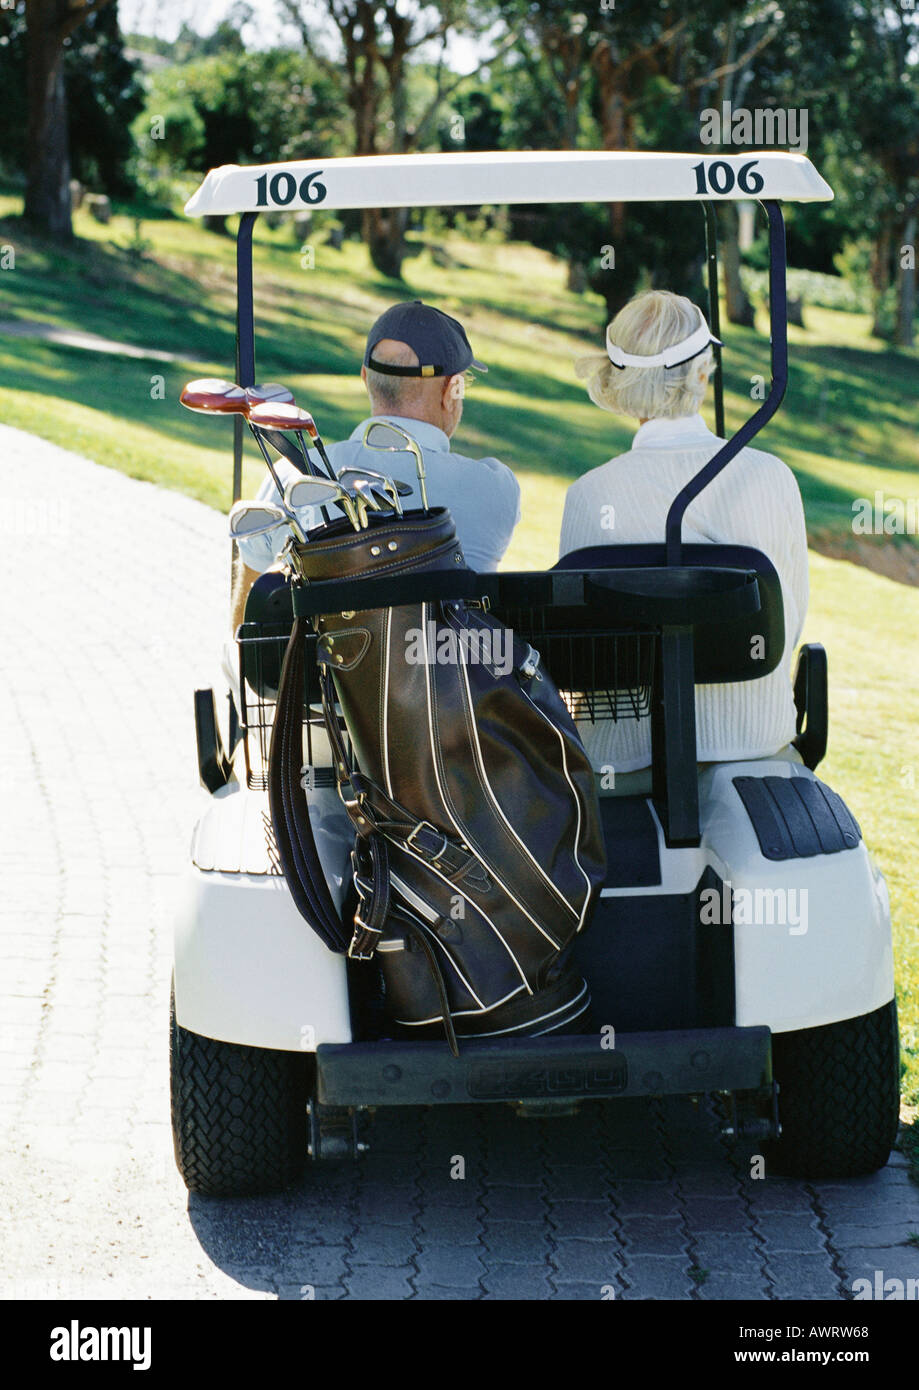 Mature man and woman in golf cart, rear view Stock Photo